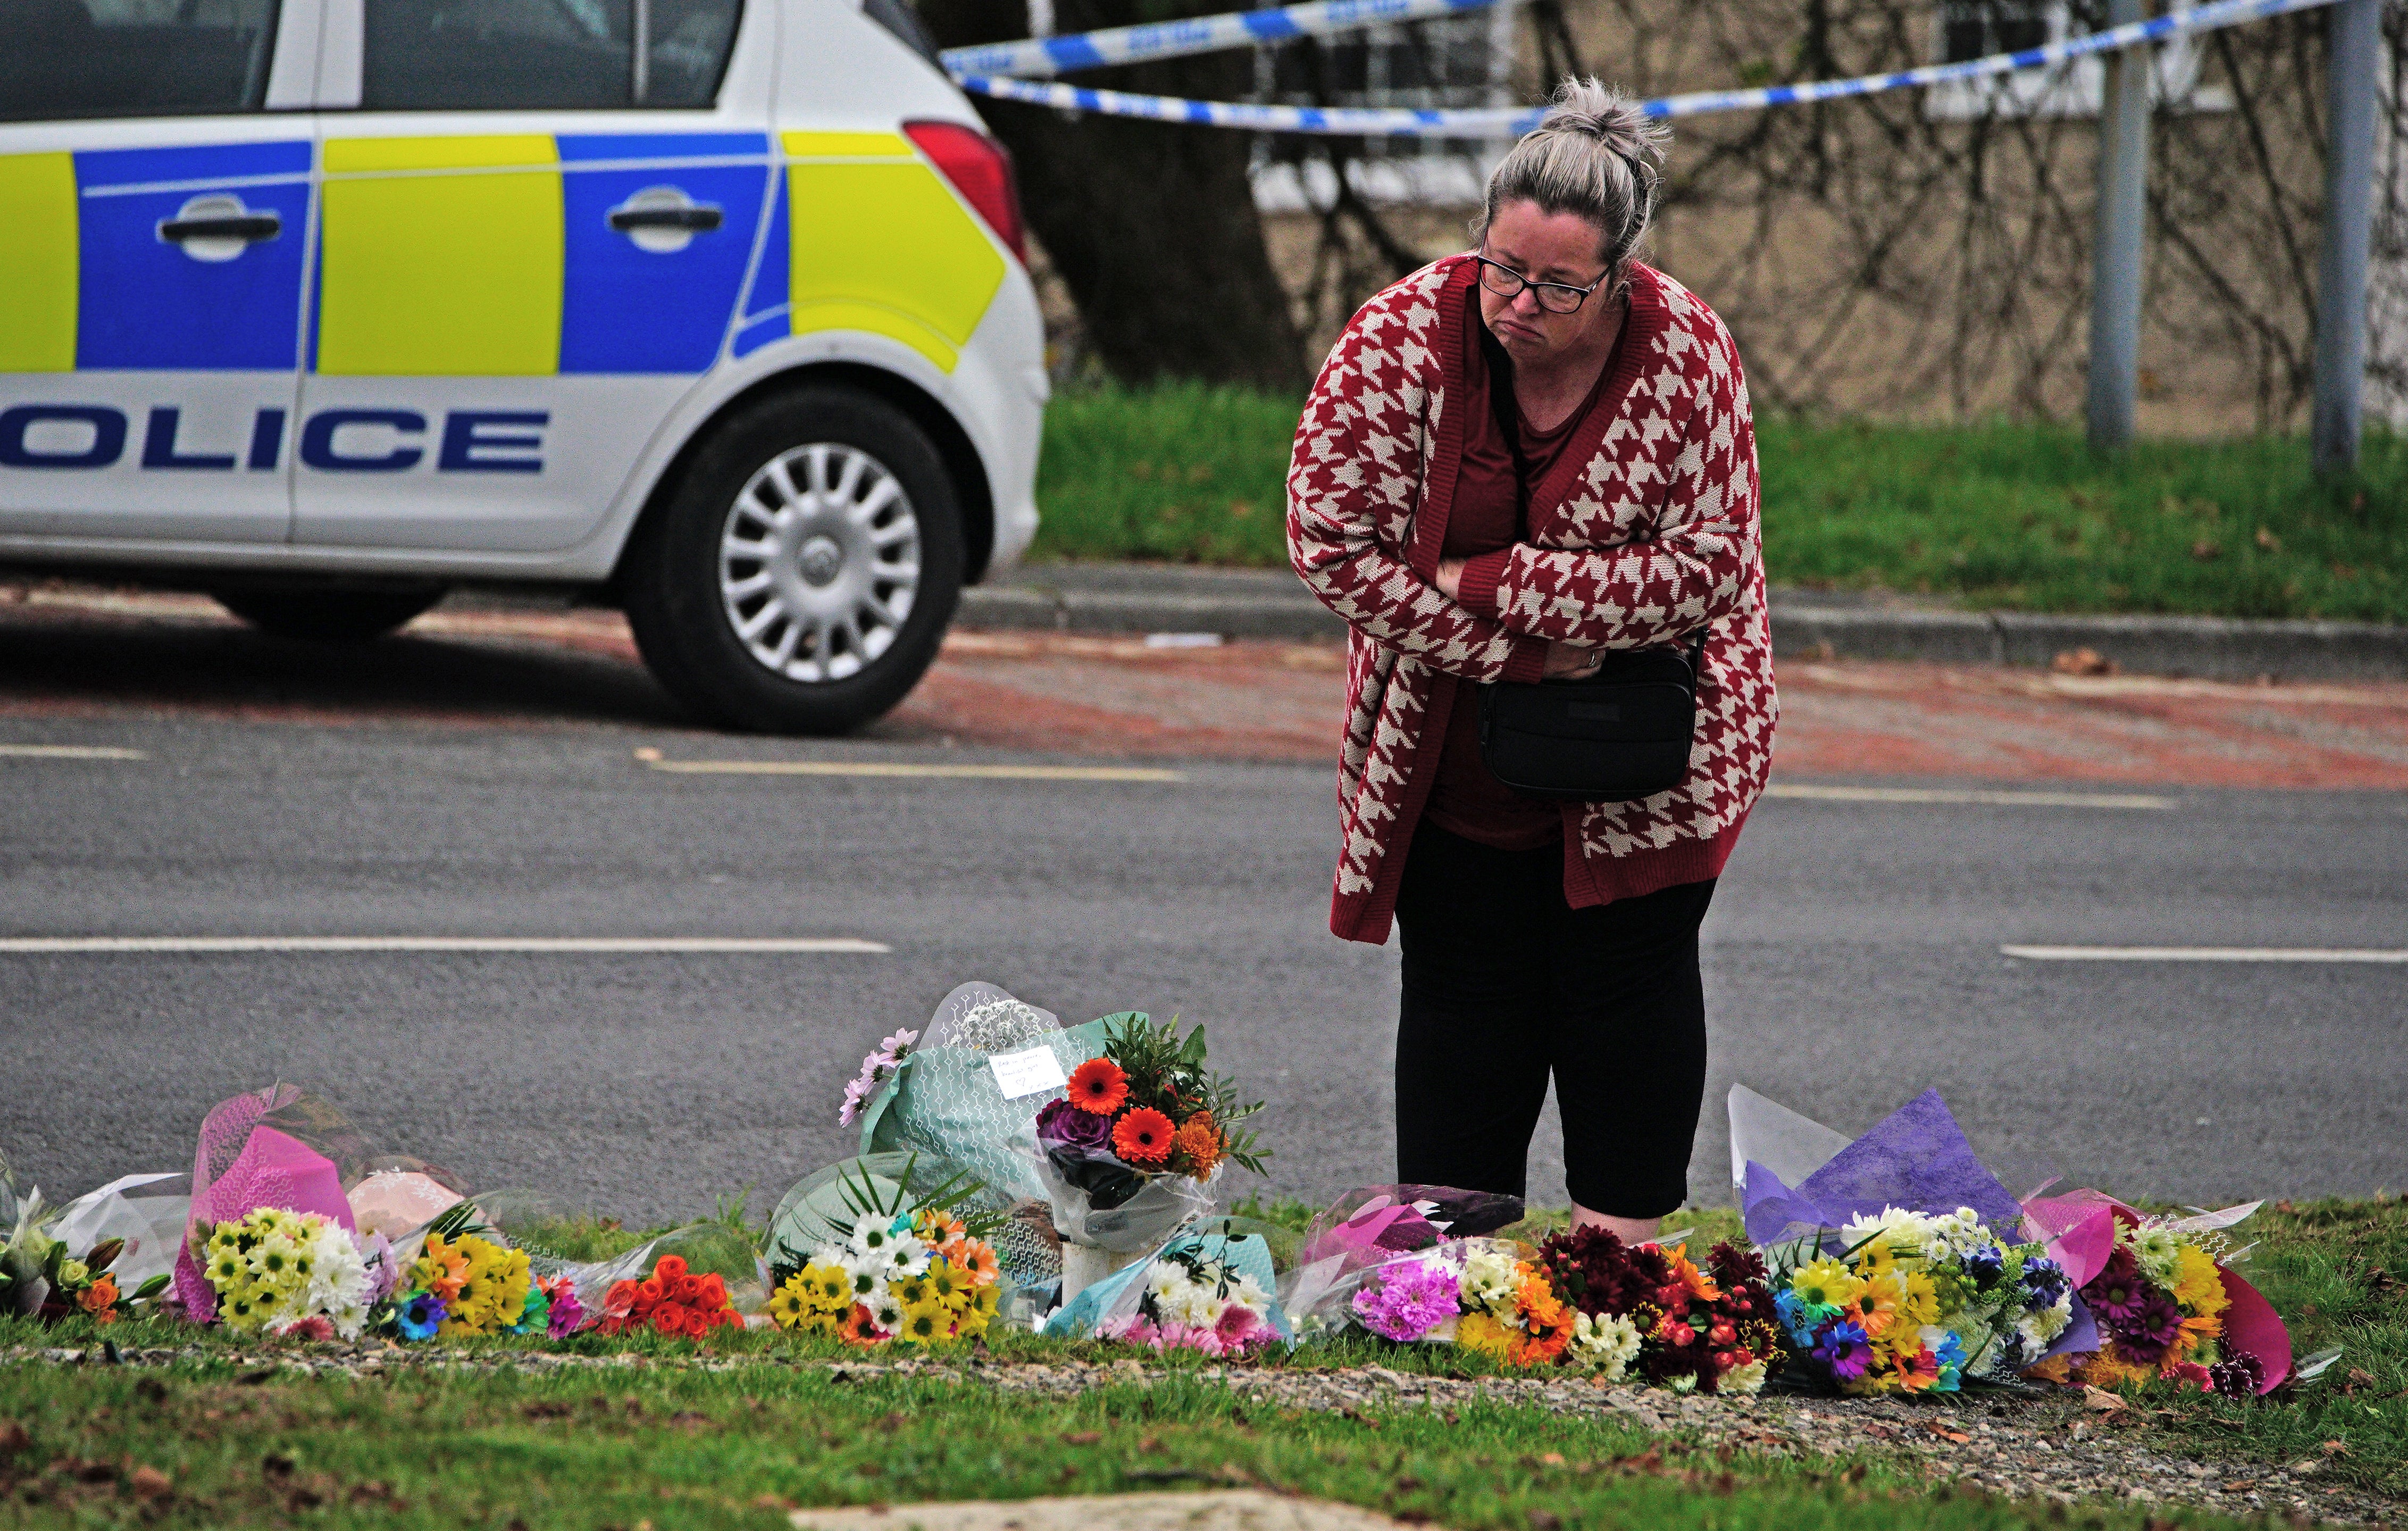 A woman lays flowers on Sheepstor Road in Plymouth (Ben Birchall/PA)